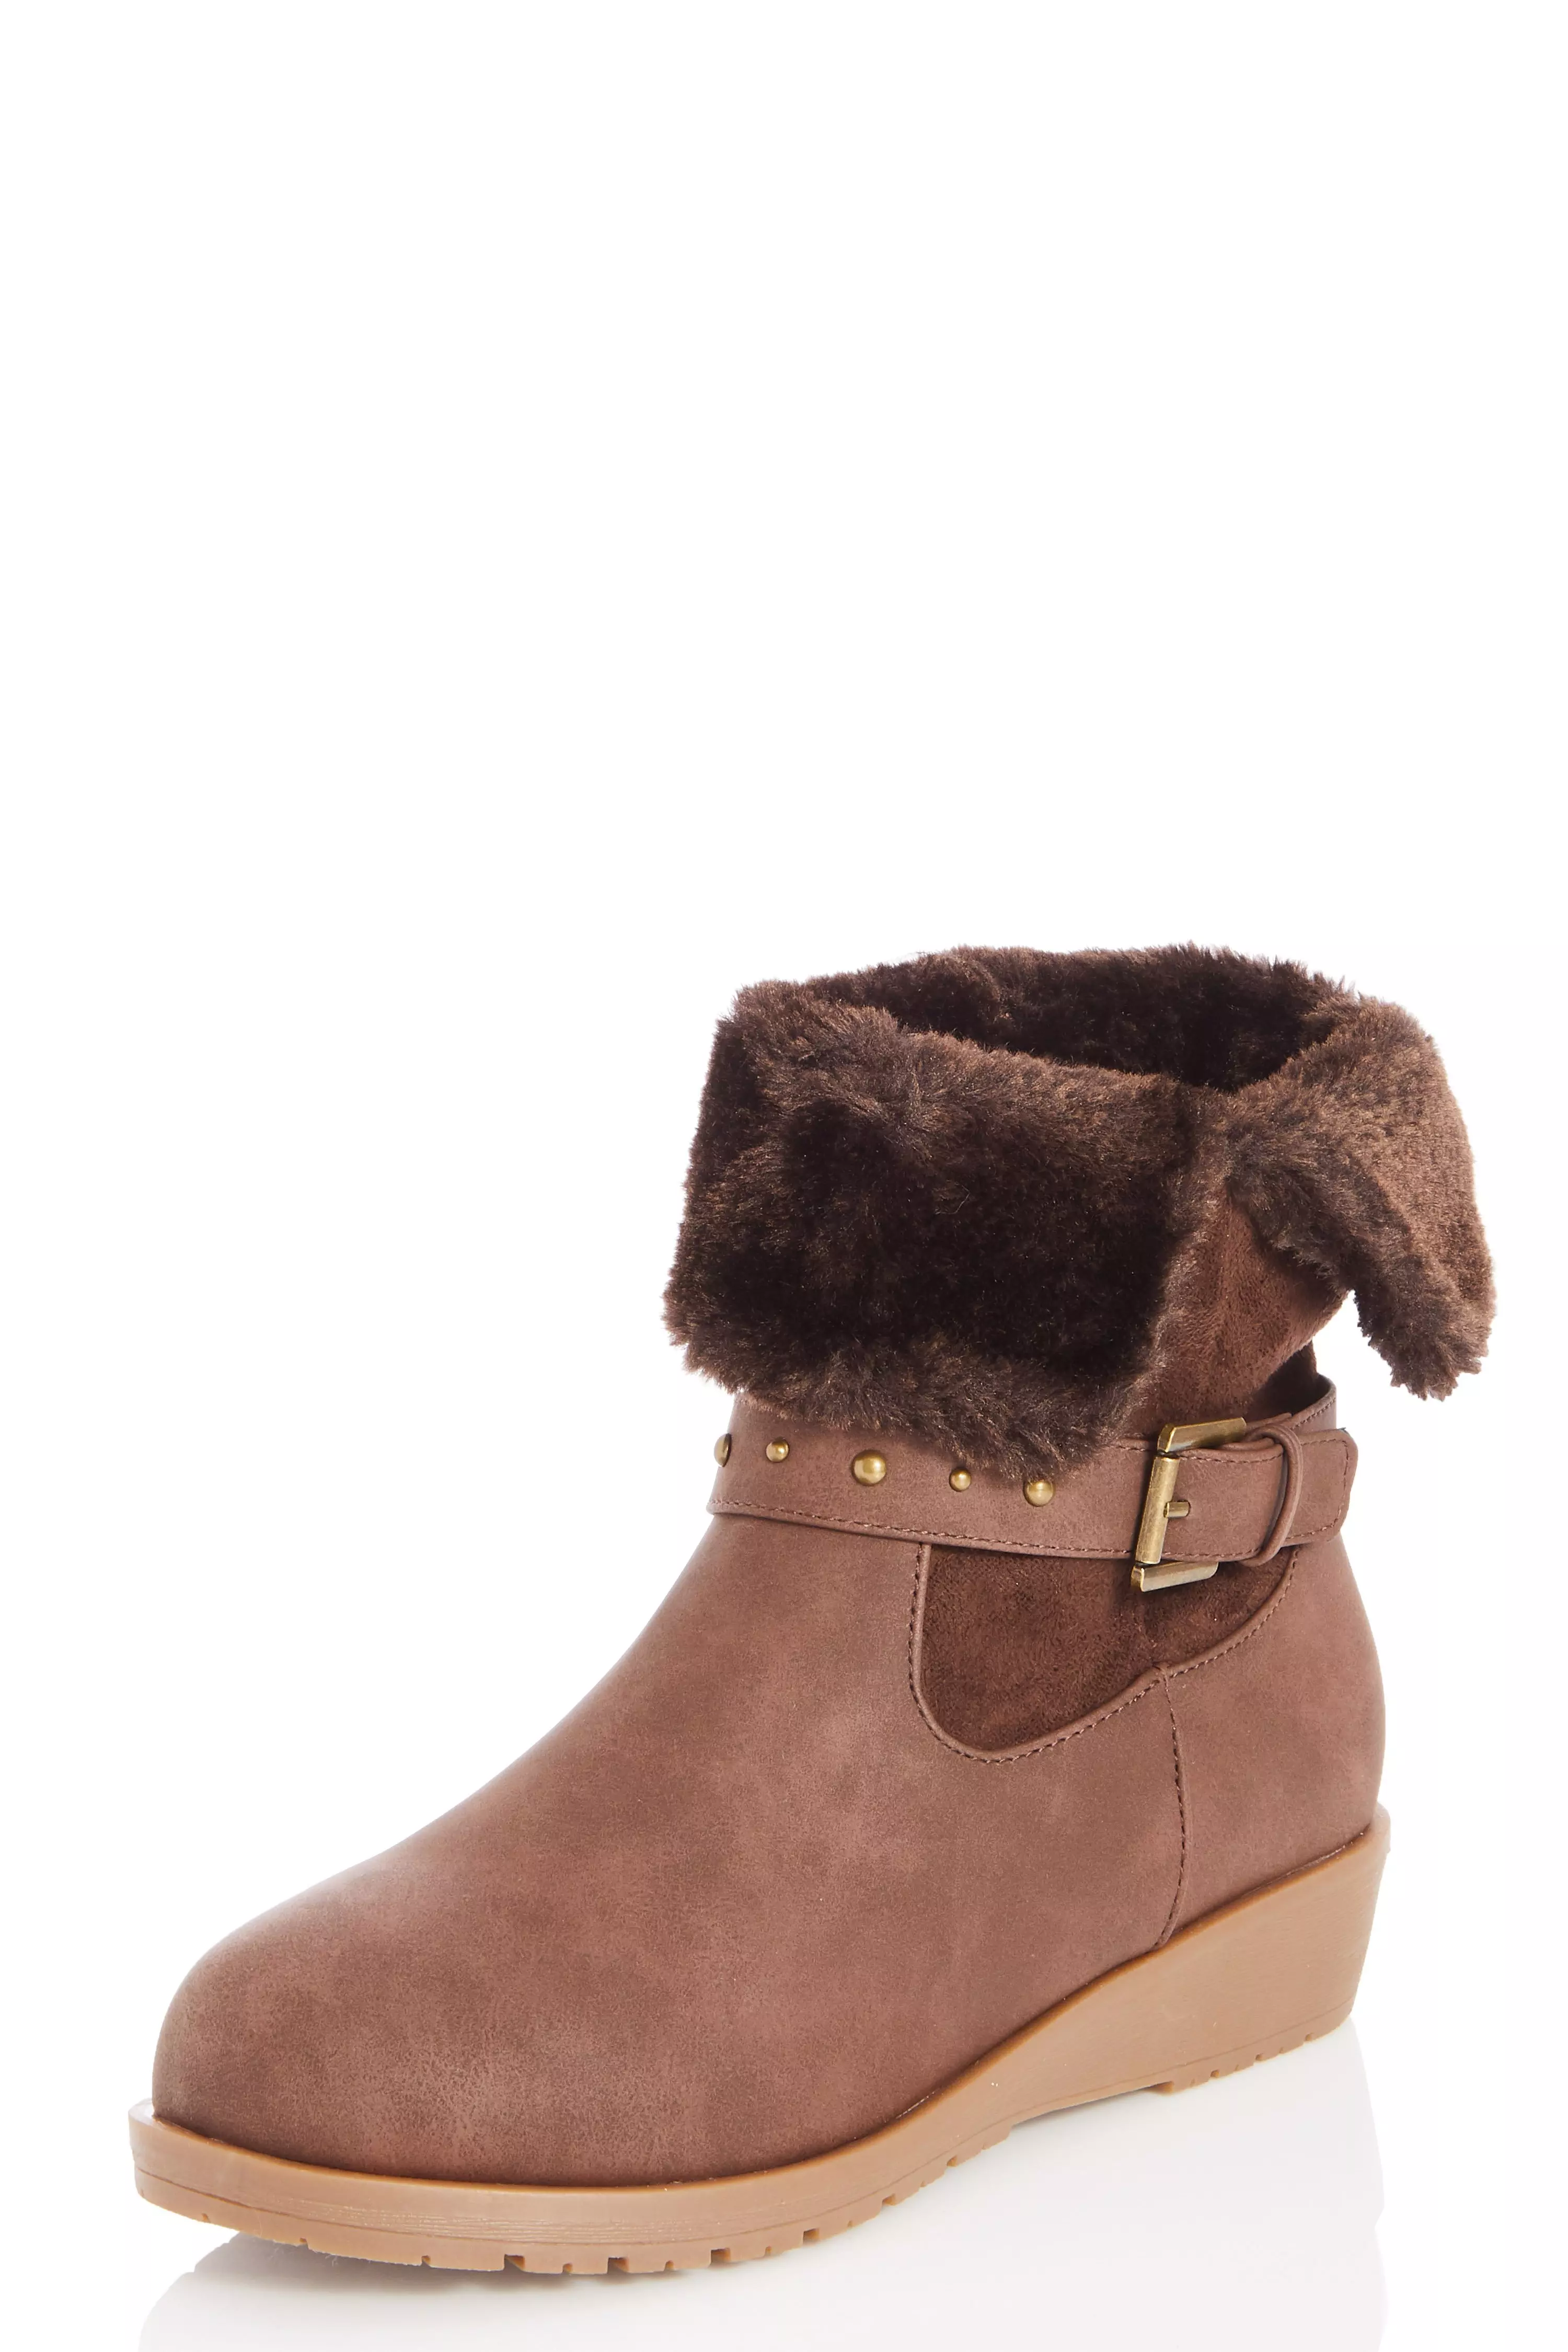 Brown Faux Leather Stud Strap Wedge Boots